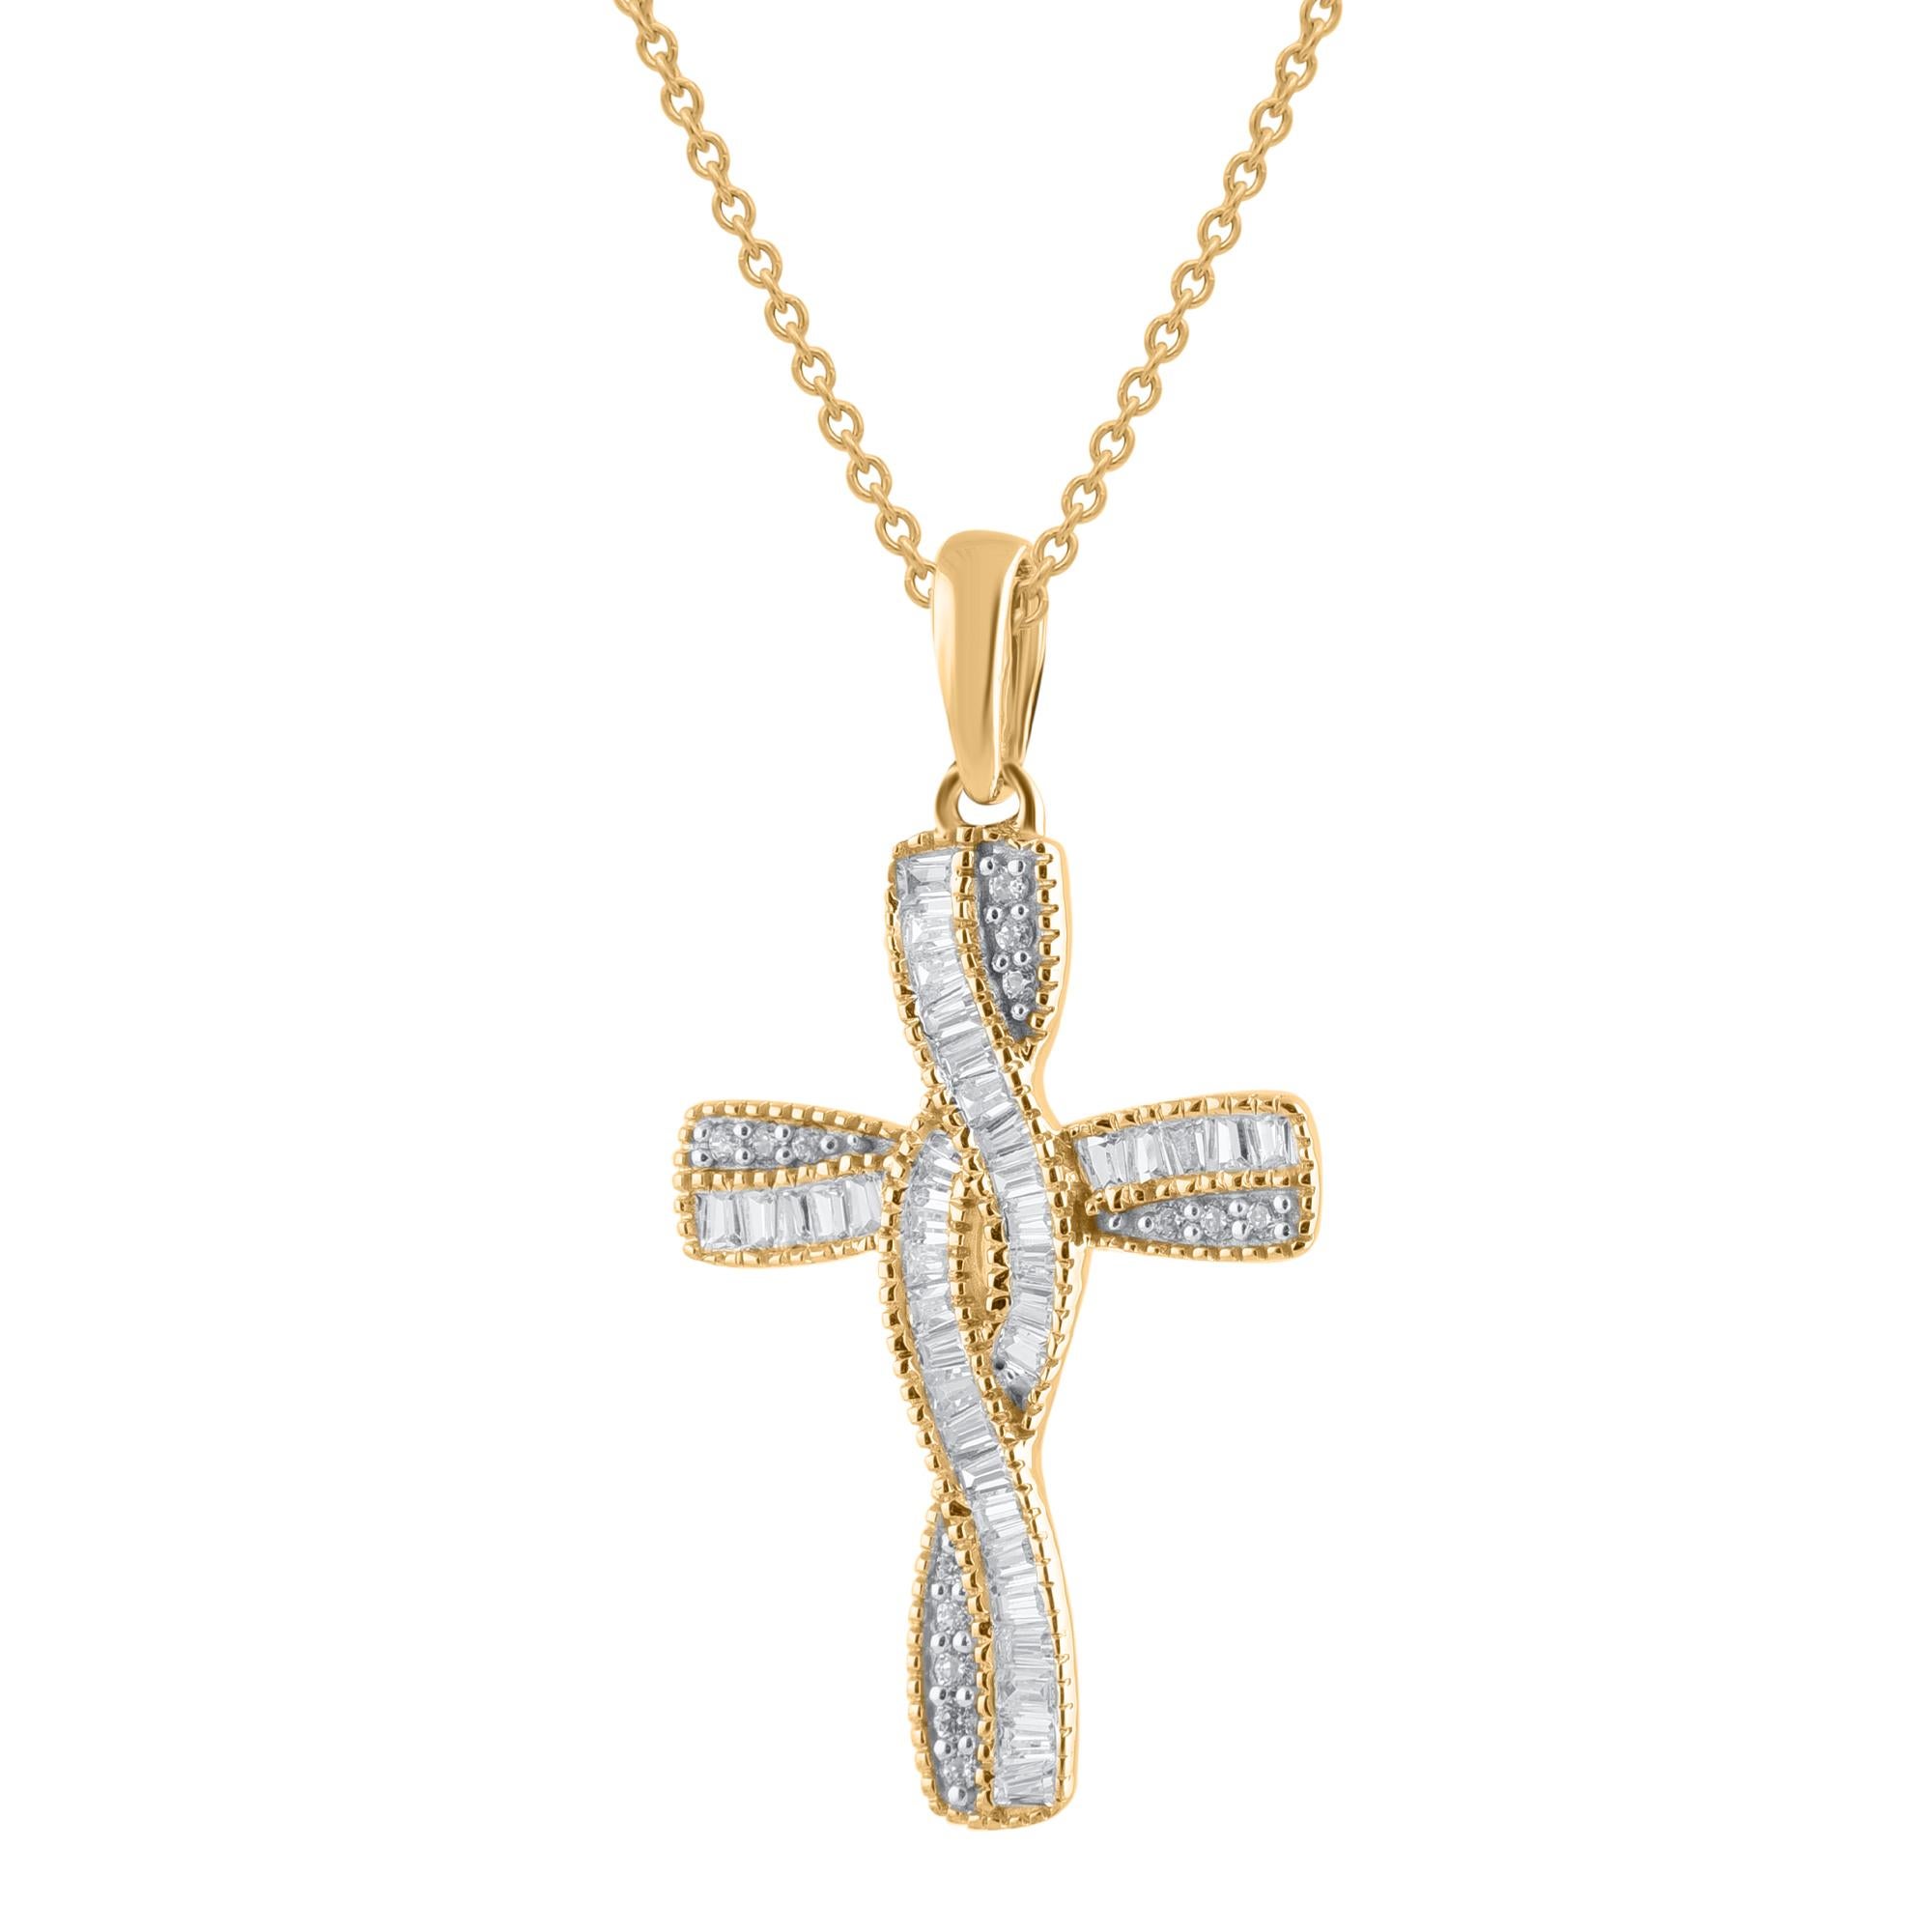 Let your faith shine with this simple and elegant cross pendant. Beautifully crafted by our inhouse experts in 18 karat yellow gold and embellished with 58 diamond set in Pave & Channel setting. The total diamond weight is 0.20 carat and it shines